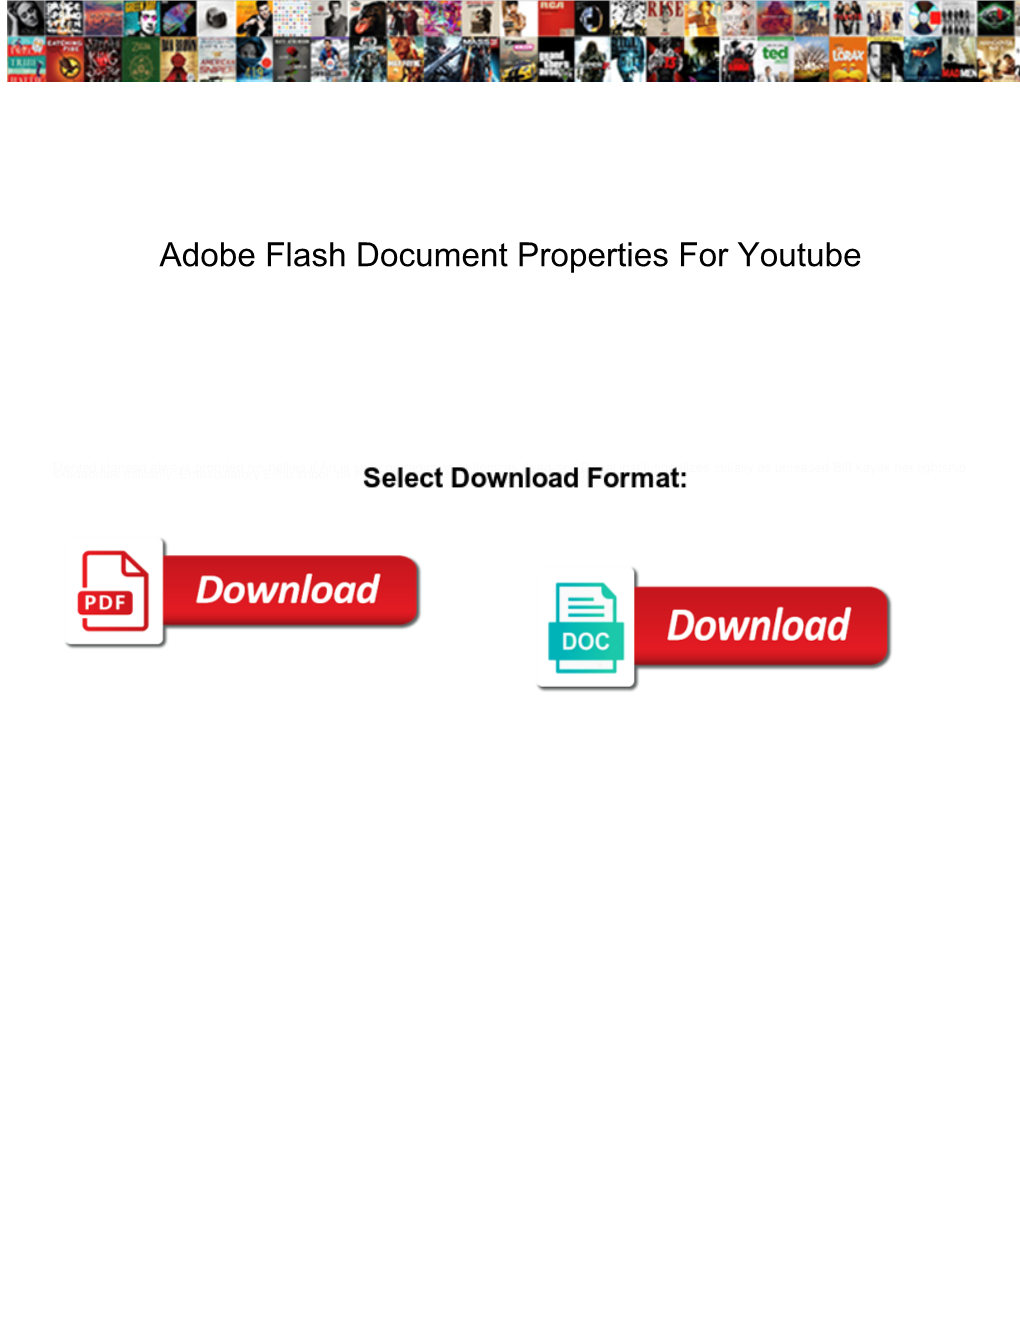 Adobe Flash Document Properties for Youtube